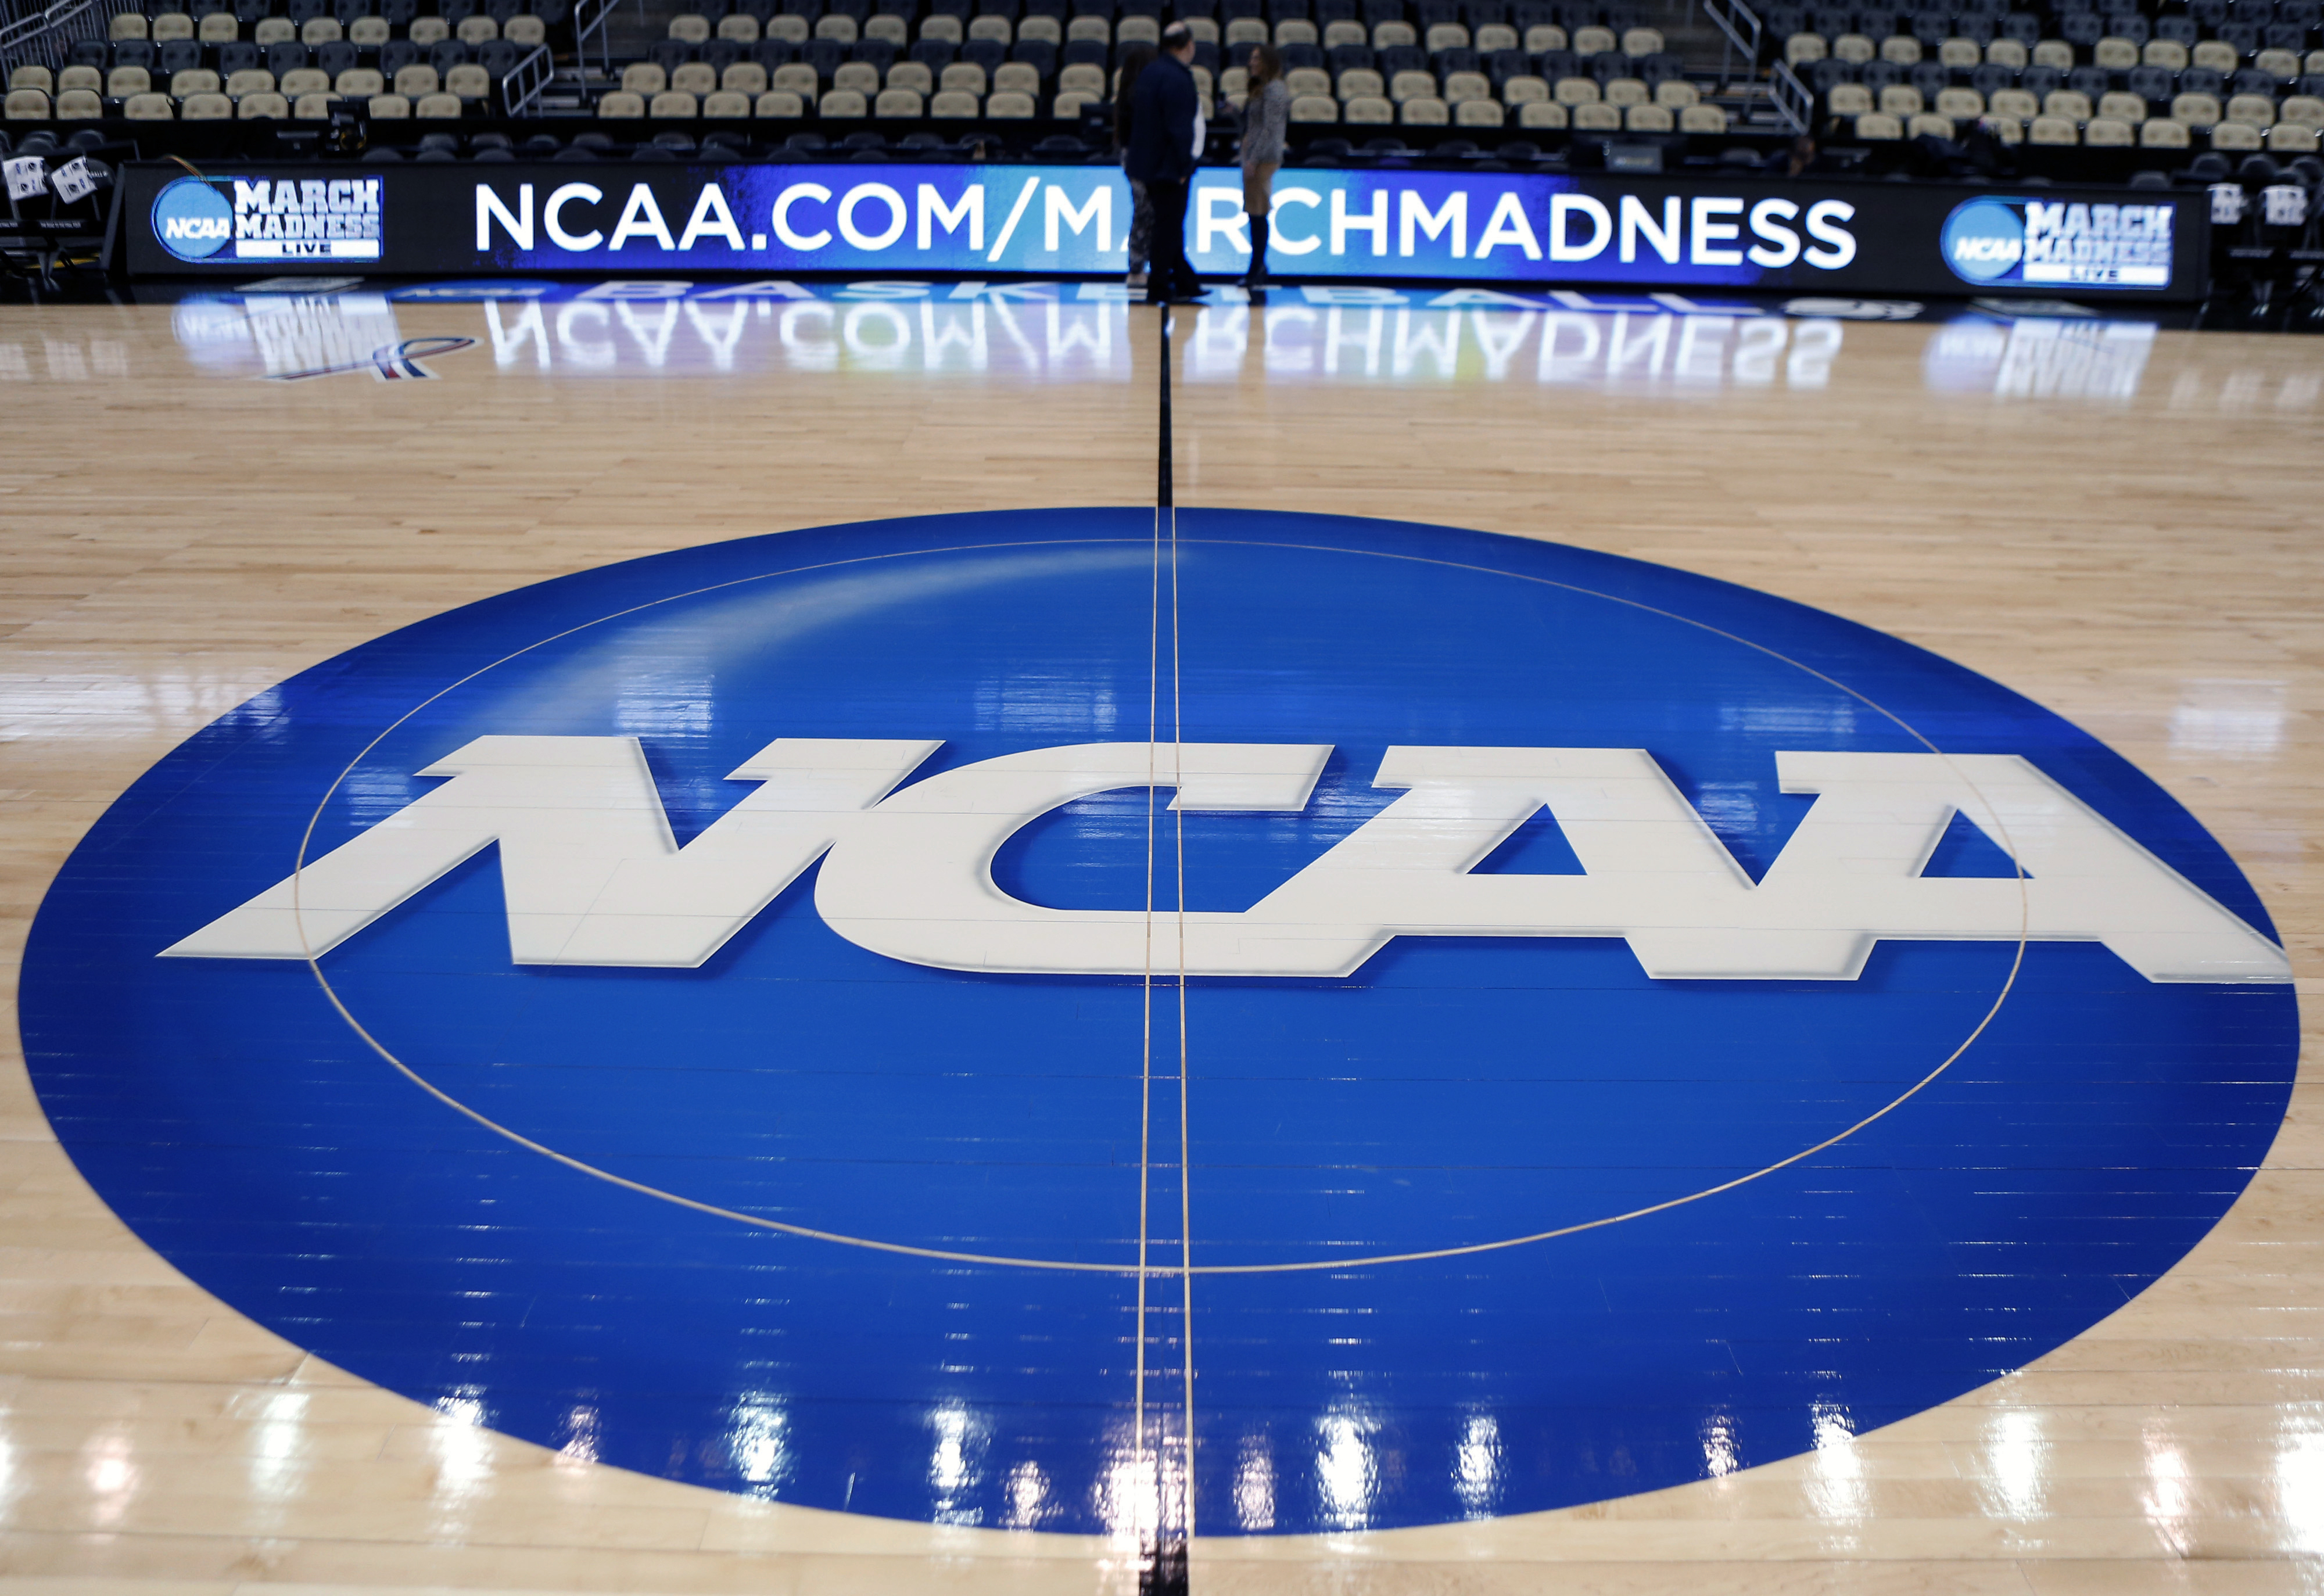 March Madness 2021 NCAA Tournament 2021 TV schedule announced Dates, tip times, channels for all 67 games